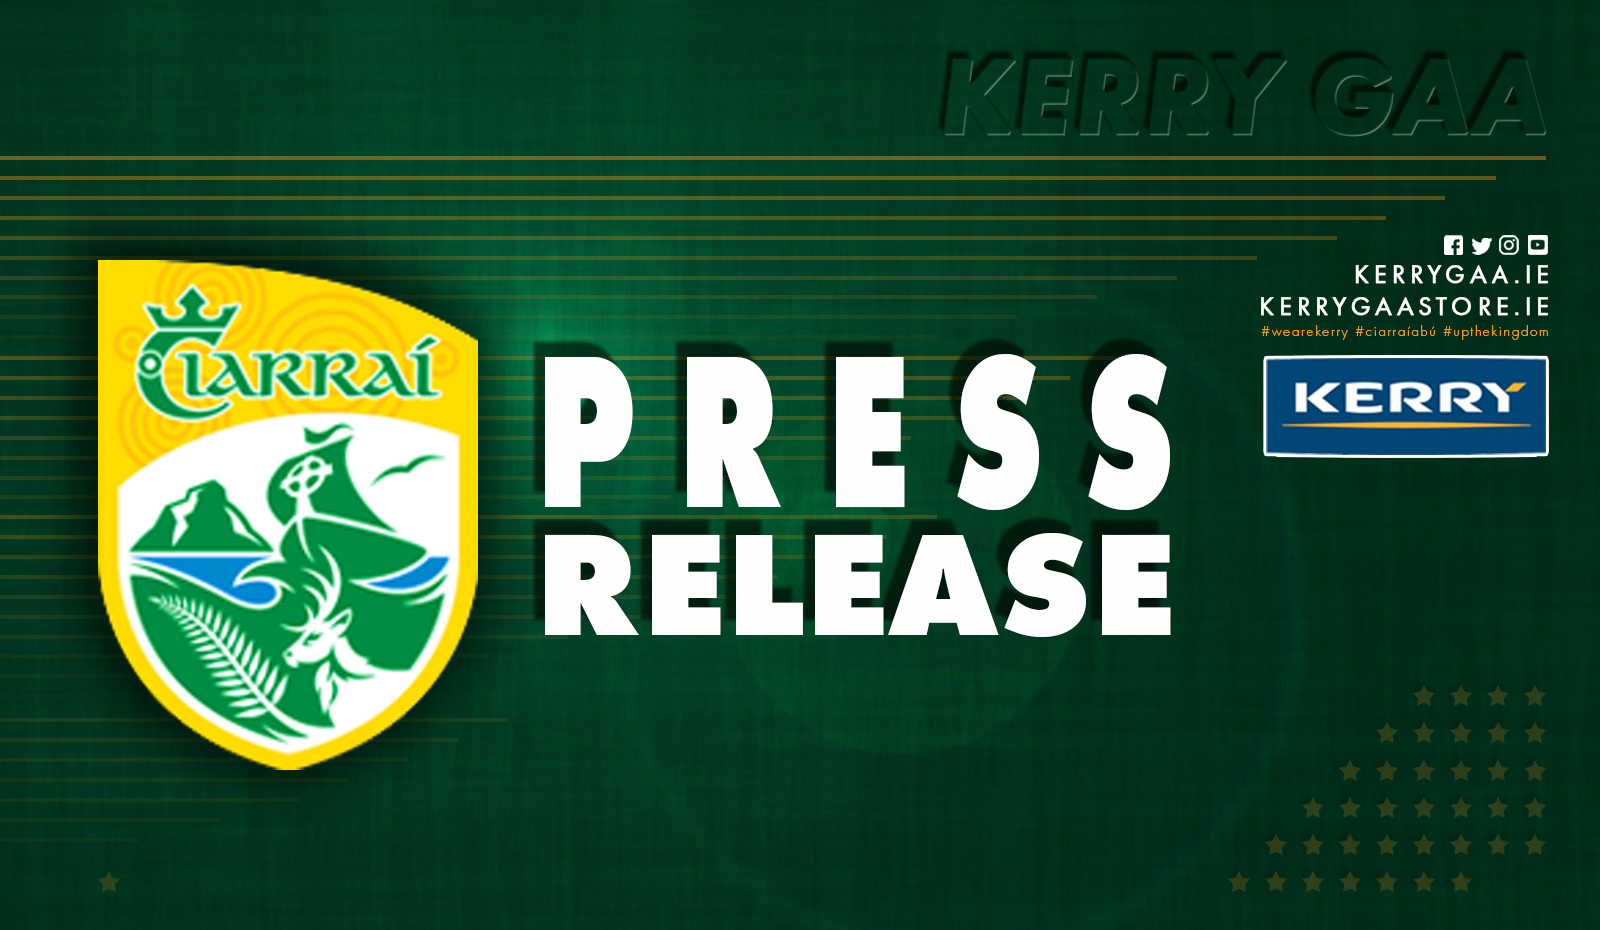 Jack O’Connor is ratified as the new Kerry Senior Football Manager